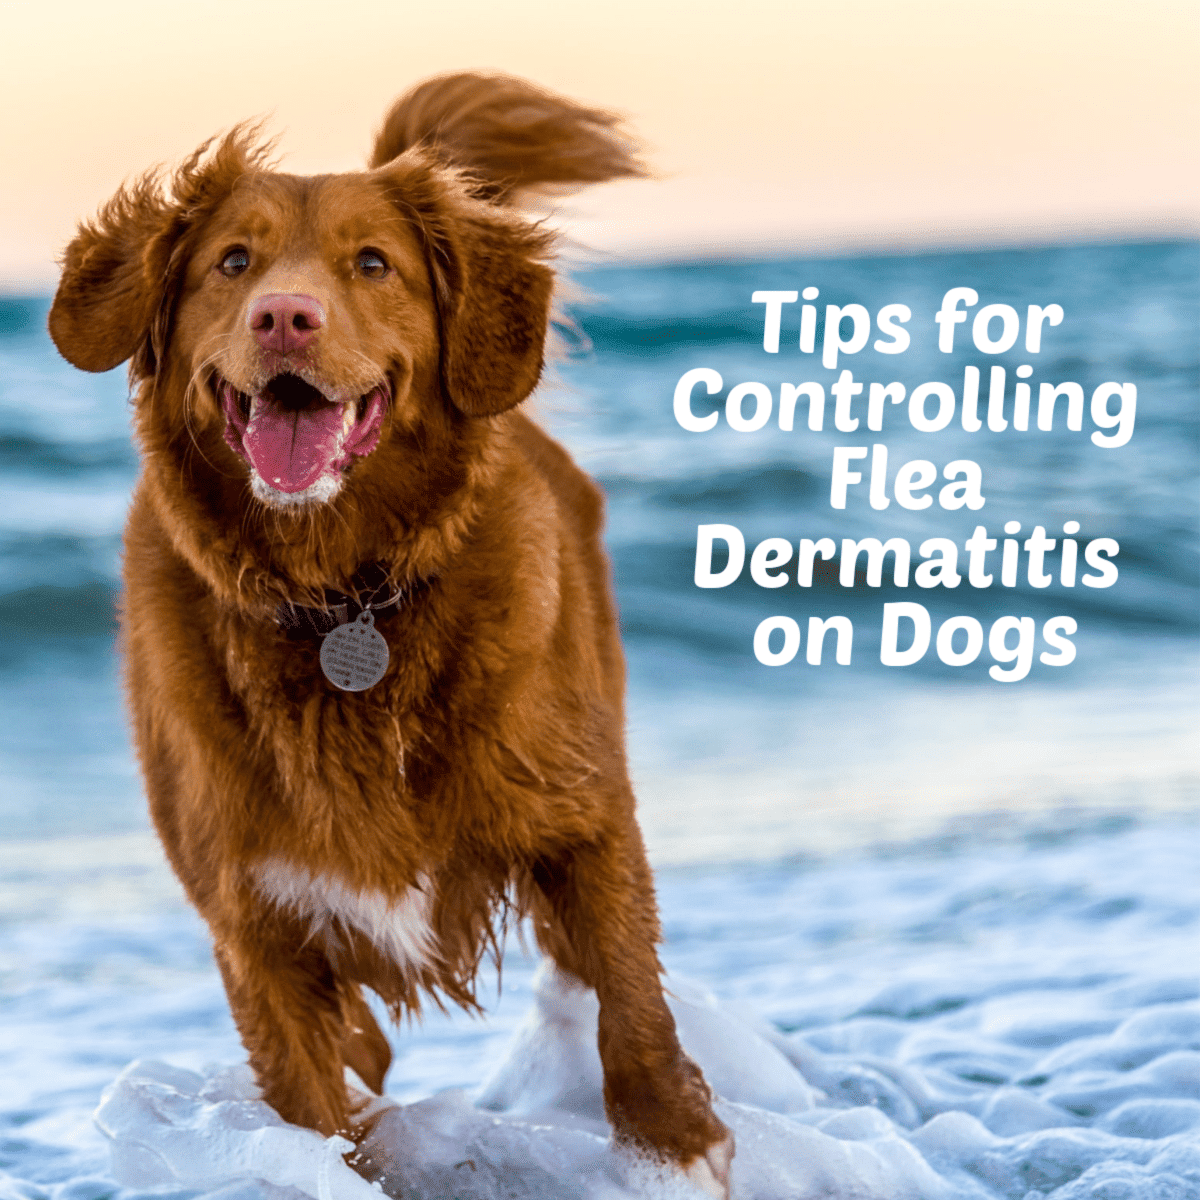 Flea Dermatitis On Dogs: The Application Of Flea Control And Treatments ...